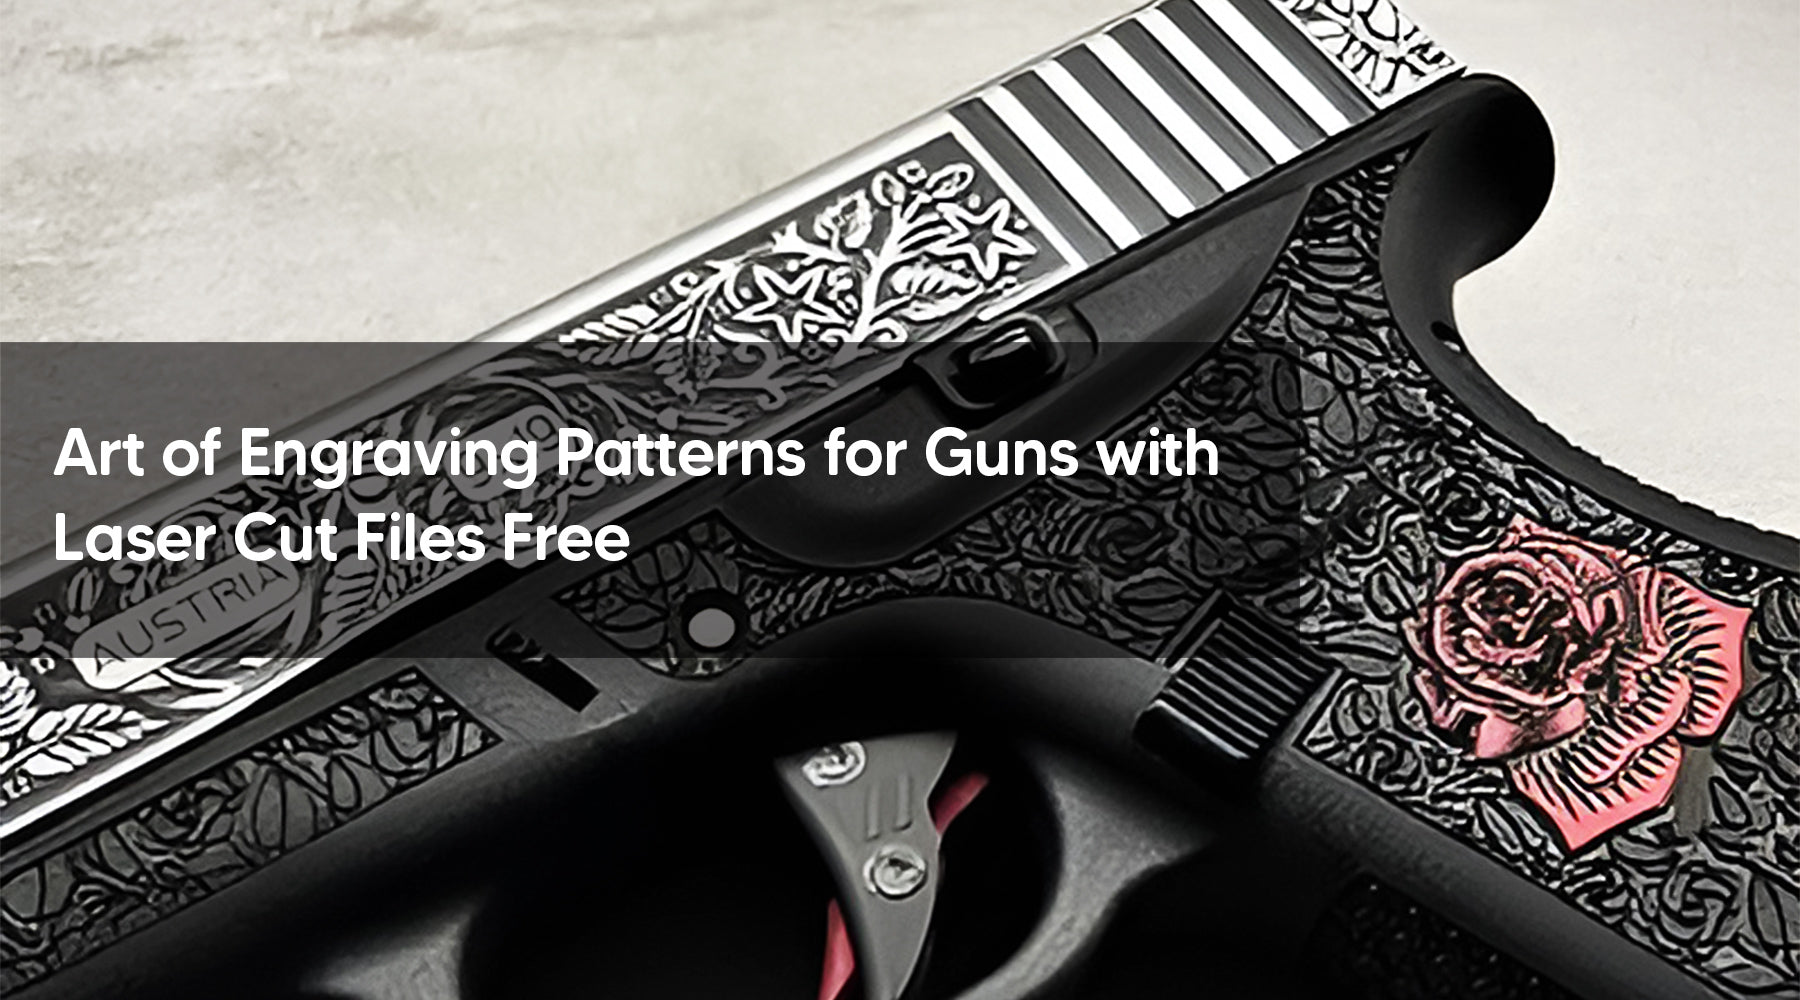 Art of Engraving Patterns for Guns with Laser Cut Files Free